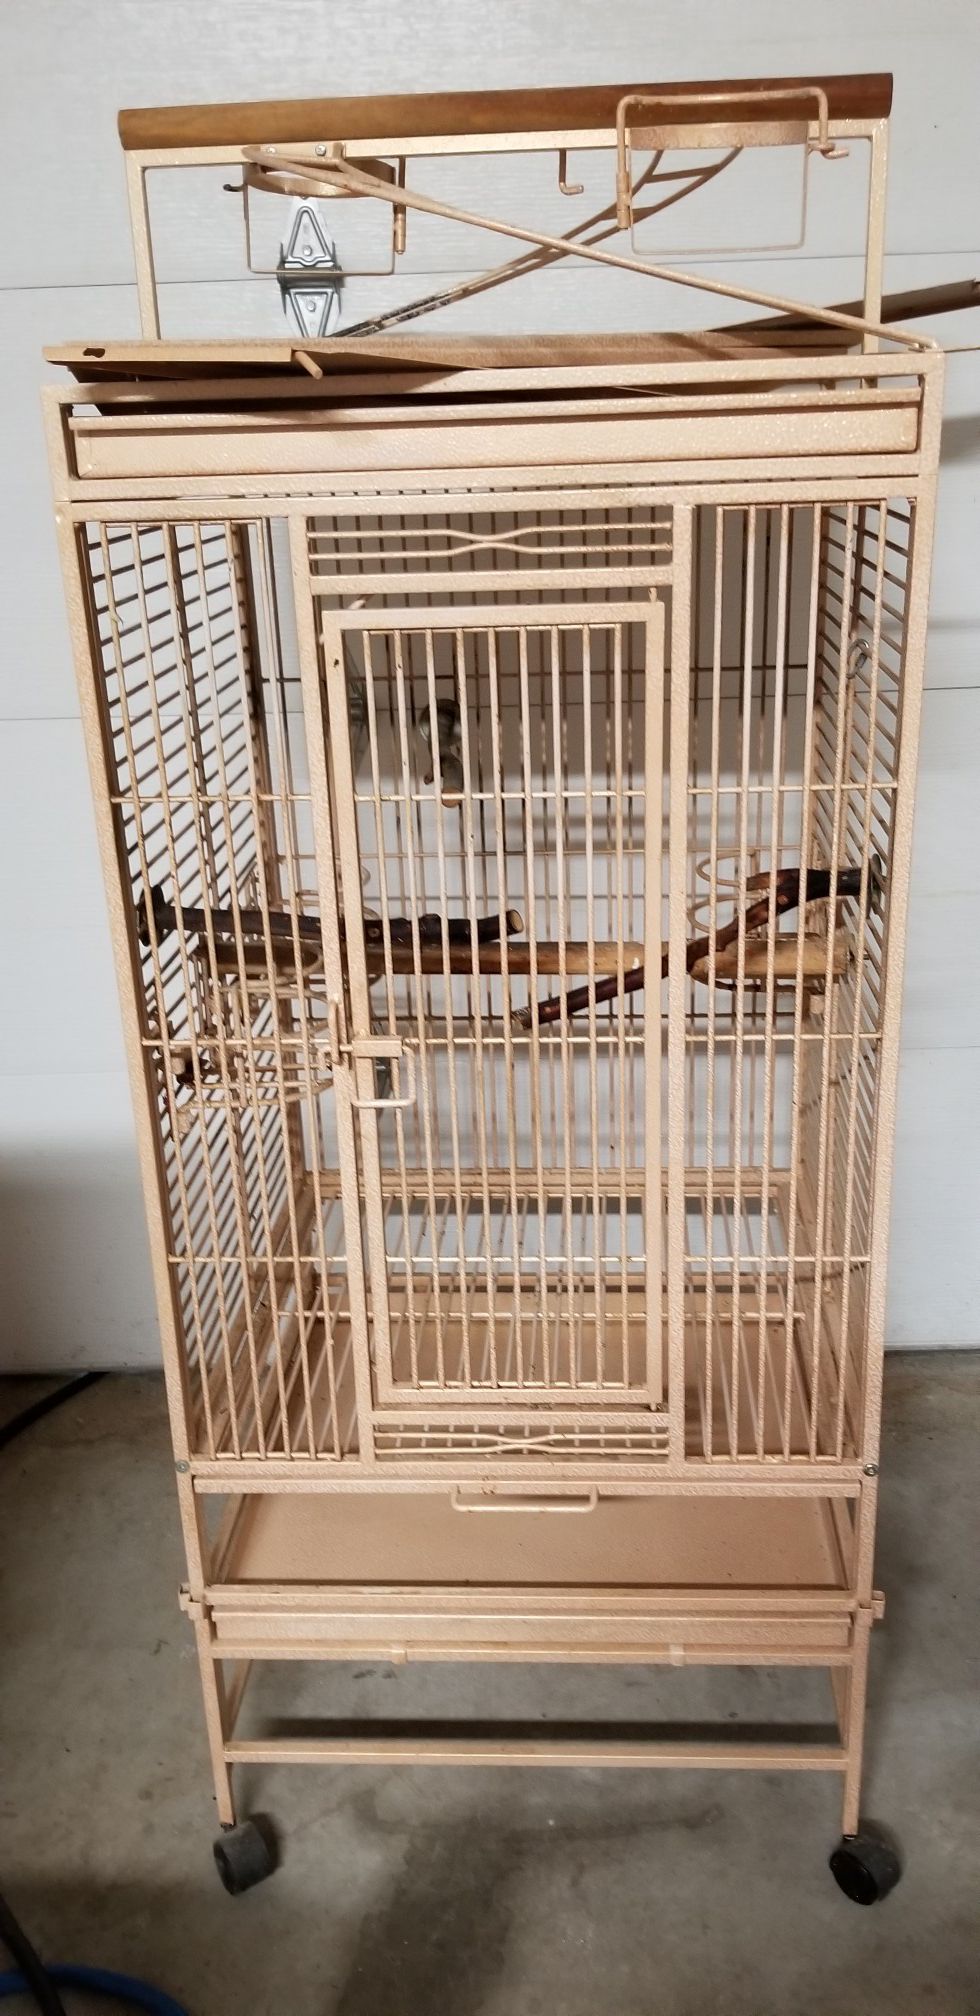 California Brand Parrot Cage